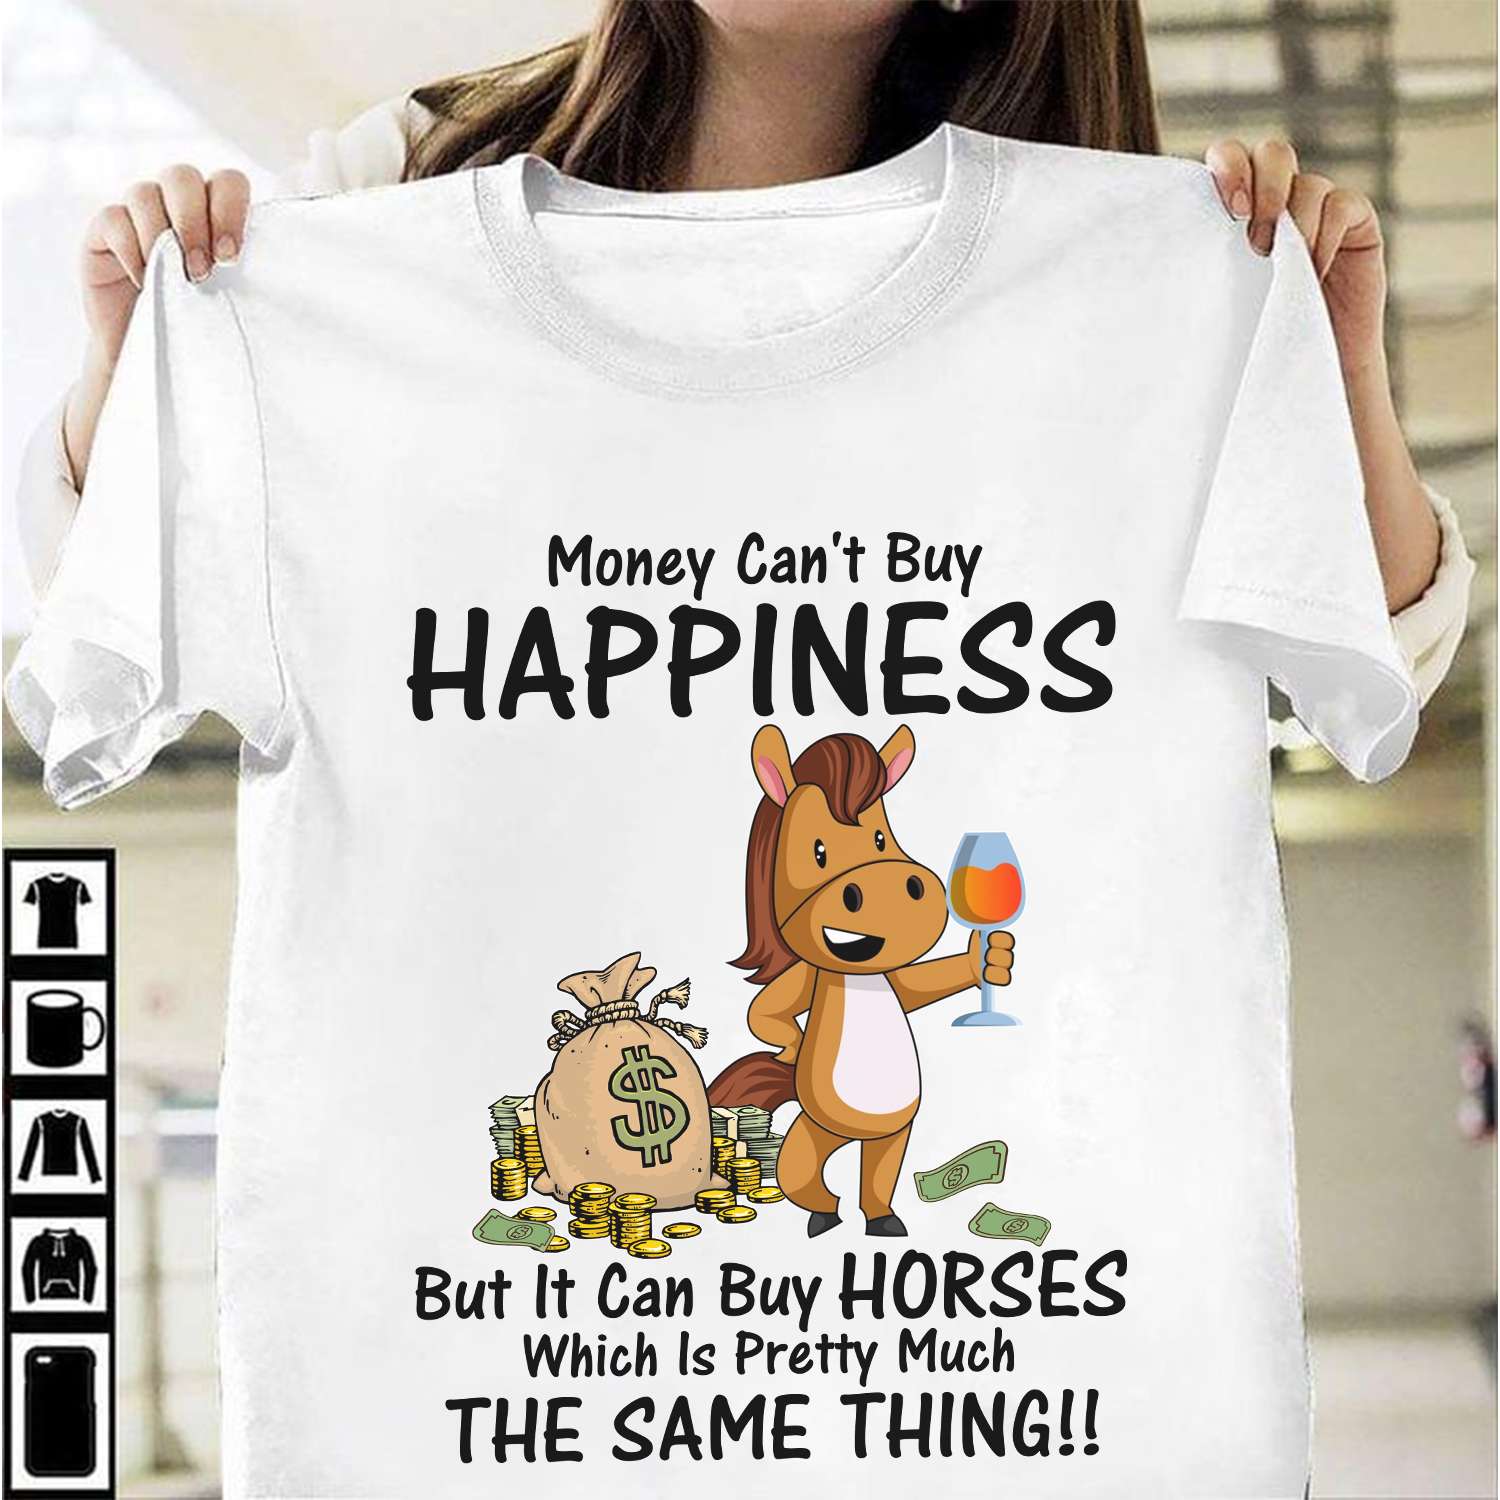 Money can't buy happiness but it can buy horses which is pretty much the same thing - Horses and money